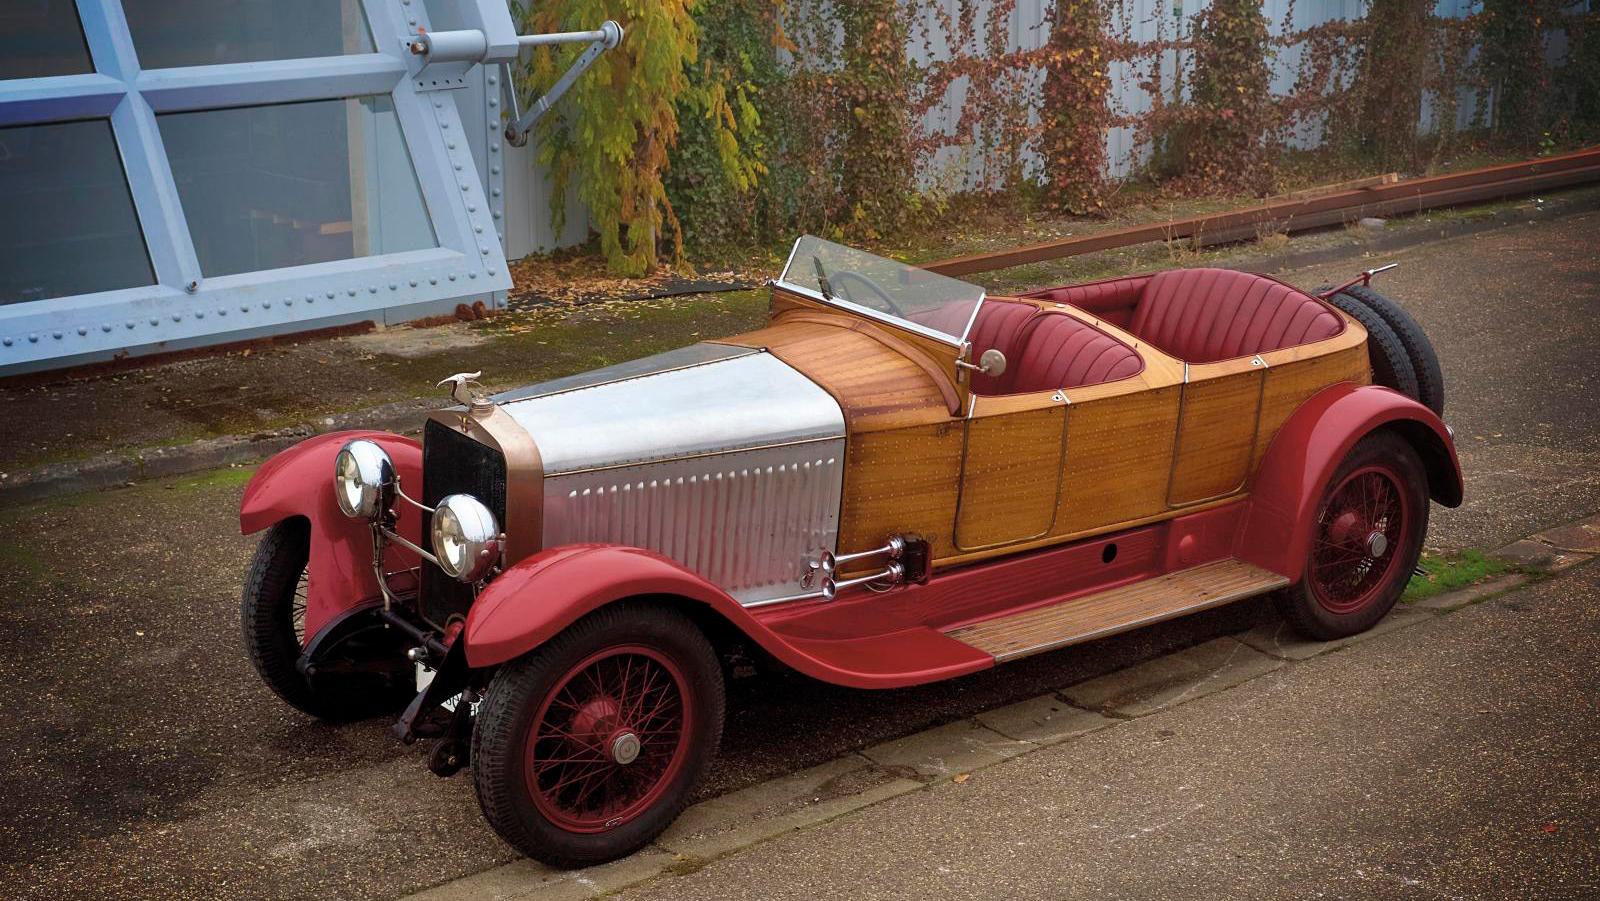 The Hispano-Suiza H6: Limousine of Kings